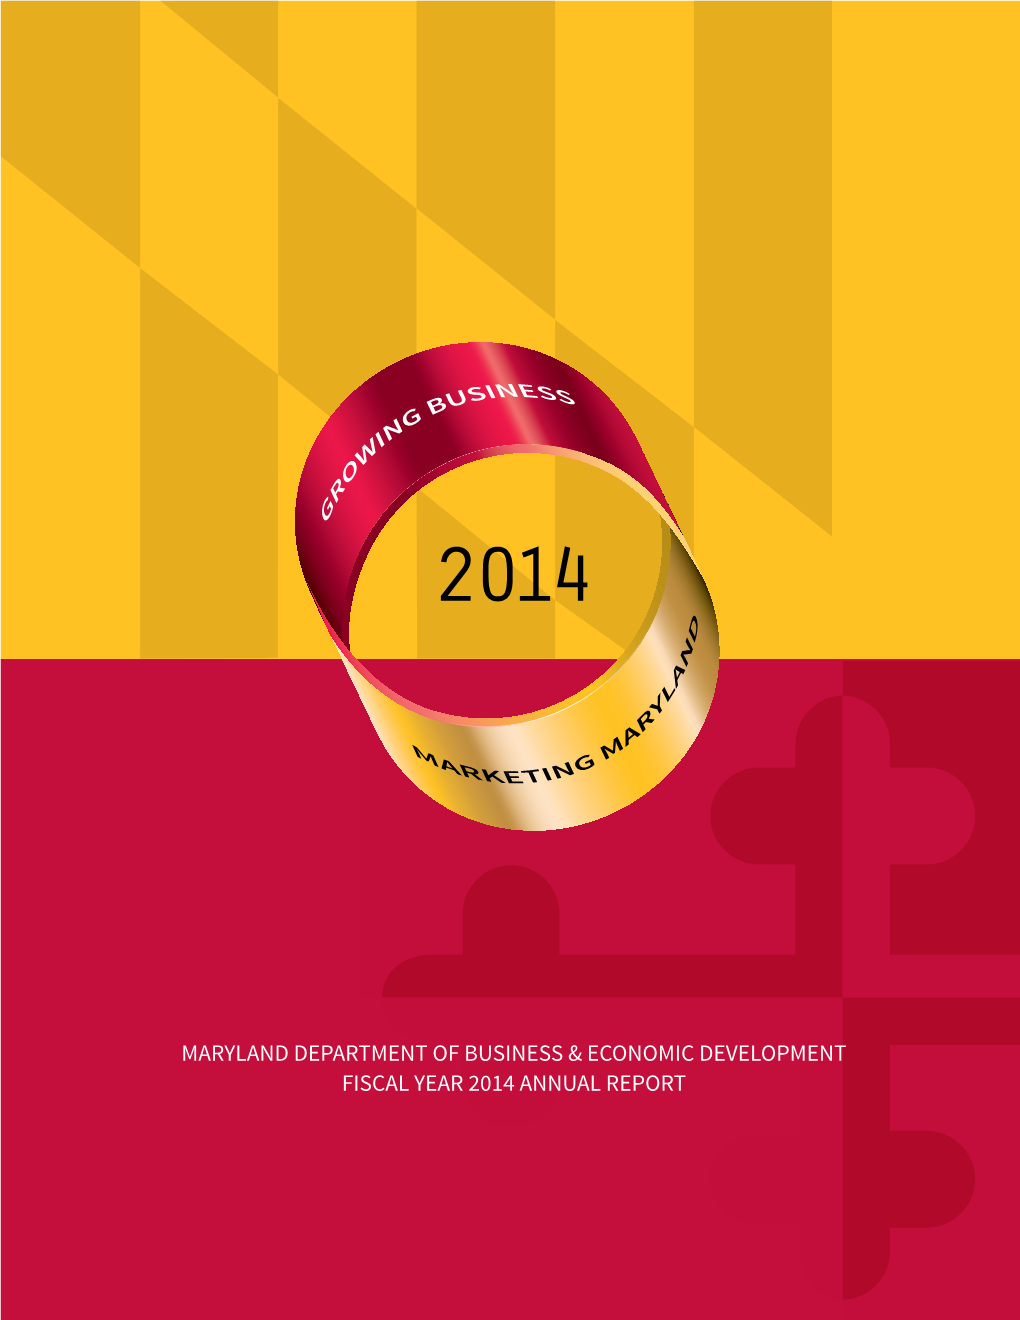 Maryland Department of Business & Economic Development Fiscal Year 2014 Annual Report